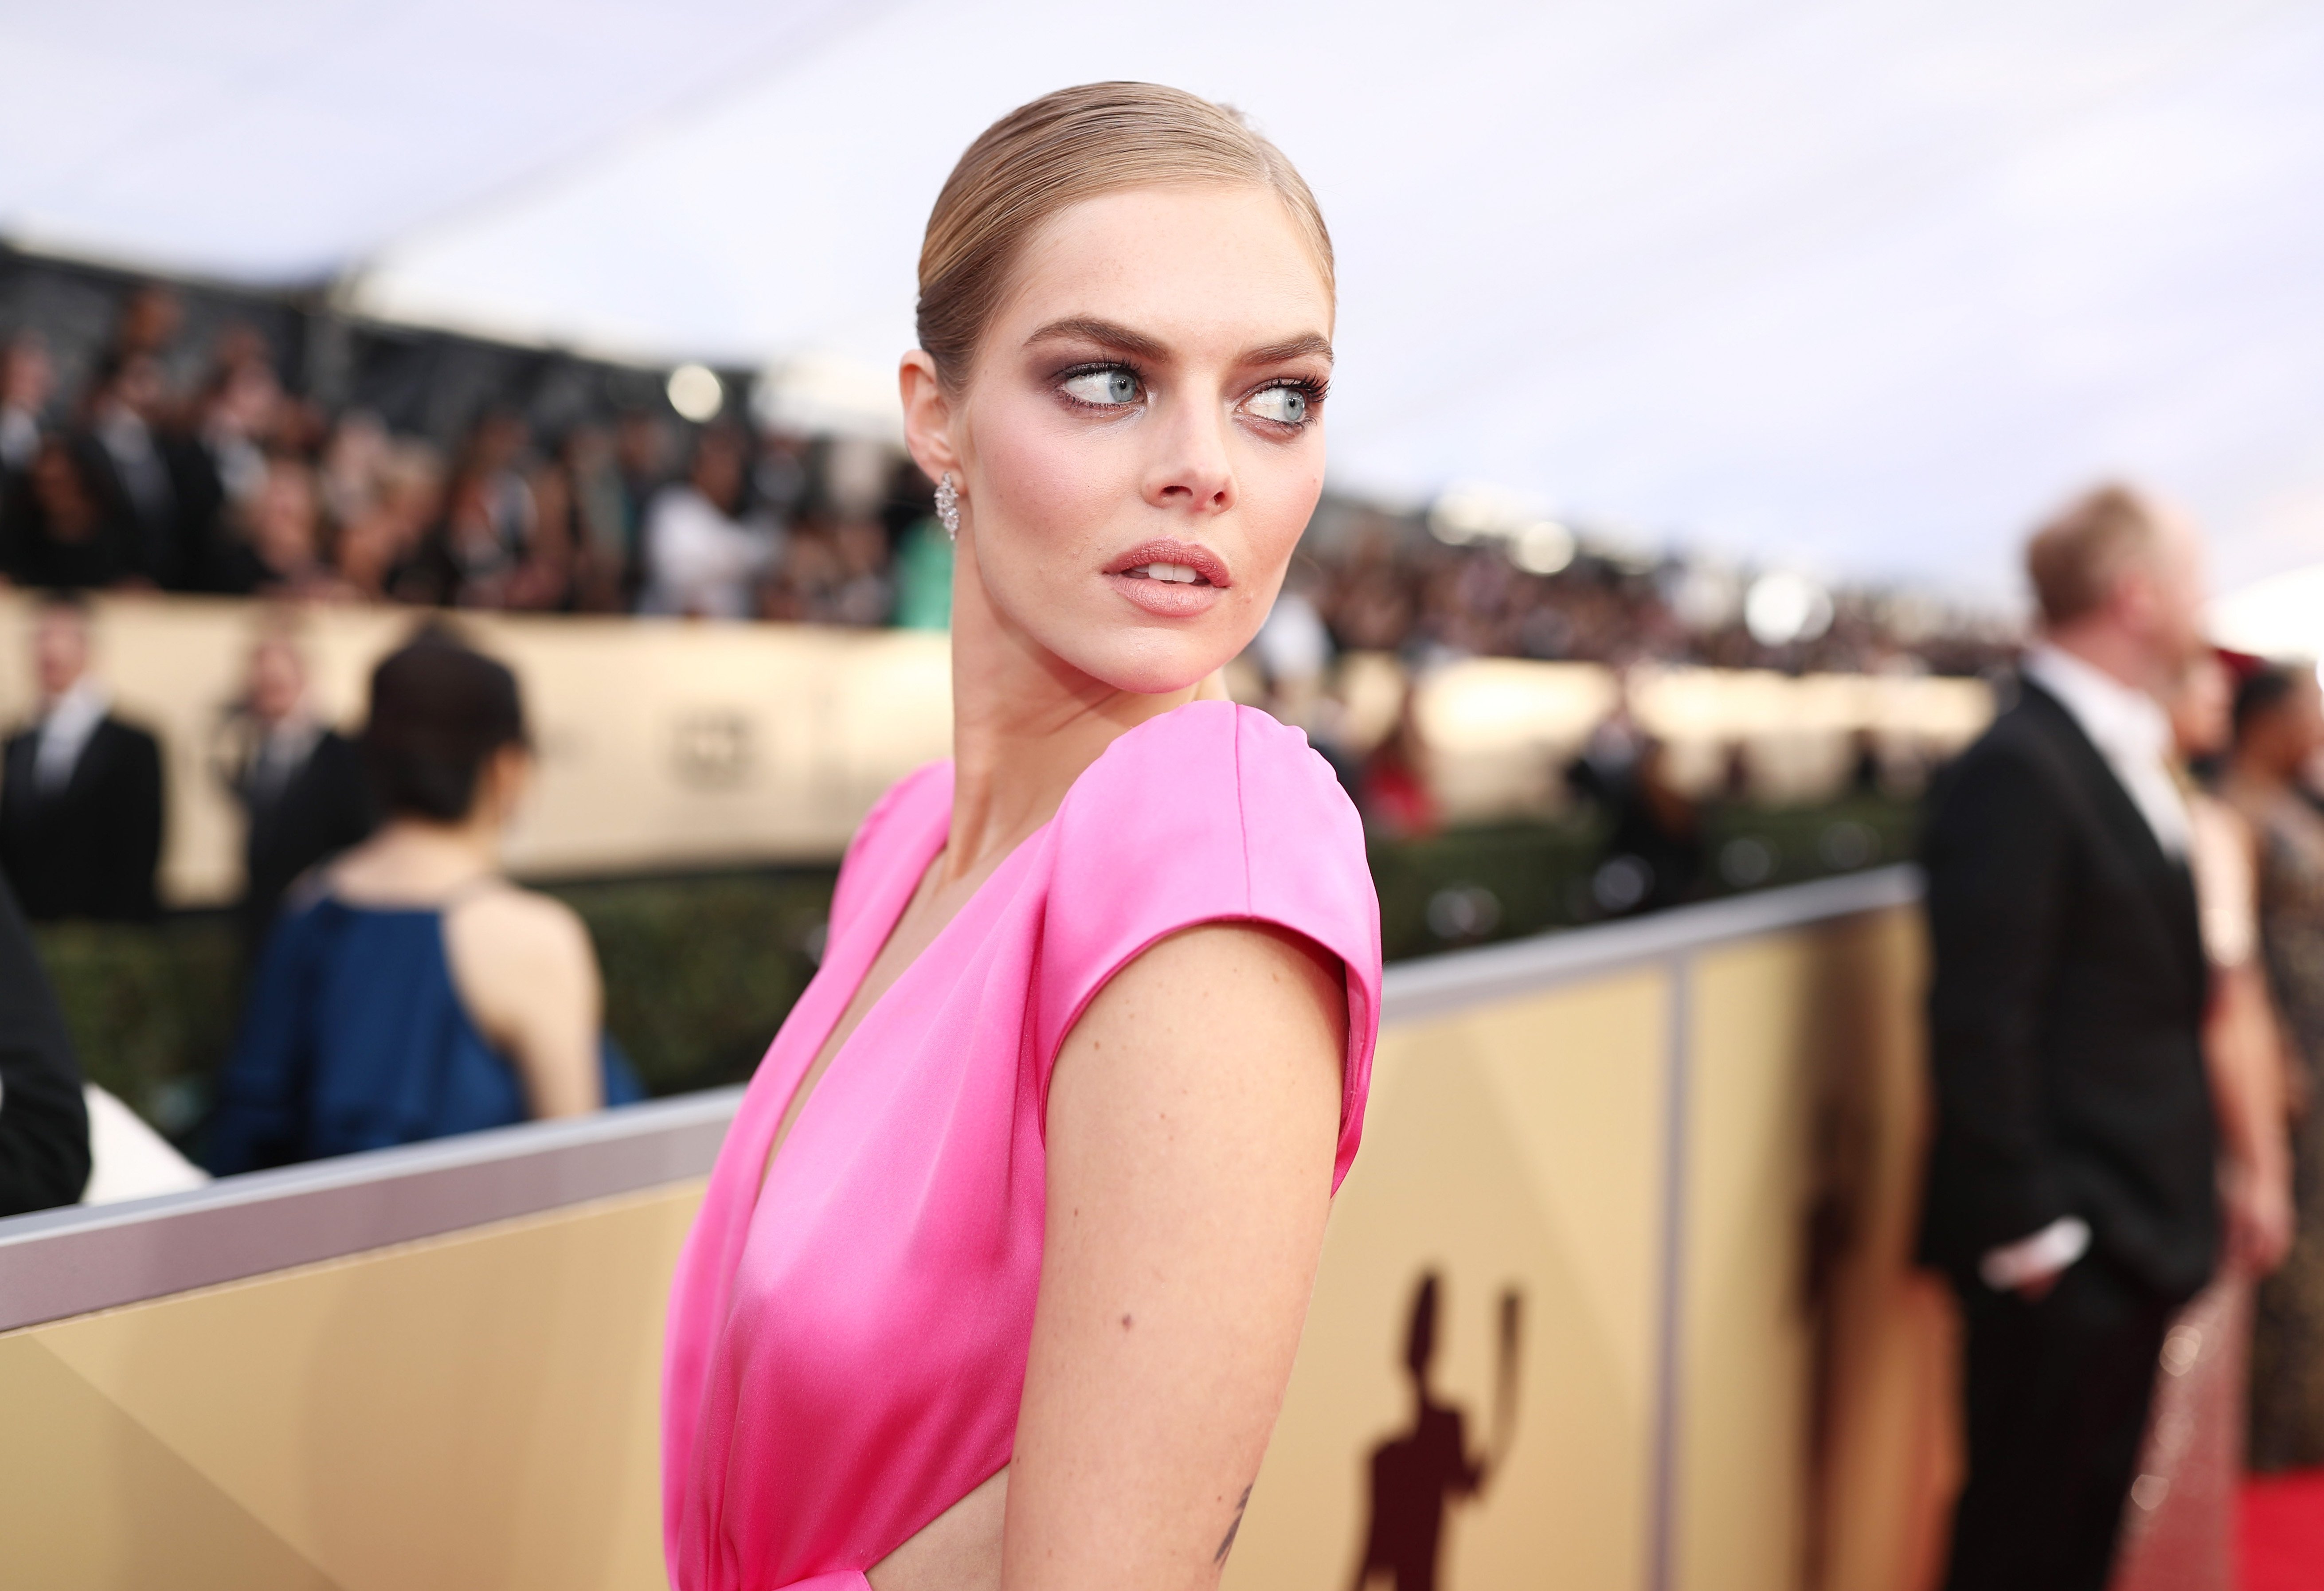 Movie star Samara Weaving attends the 24th Annual Screen Actors Guild Awards in January 2018